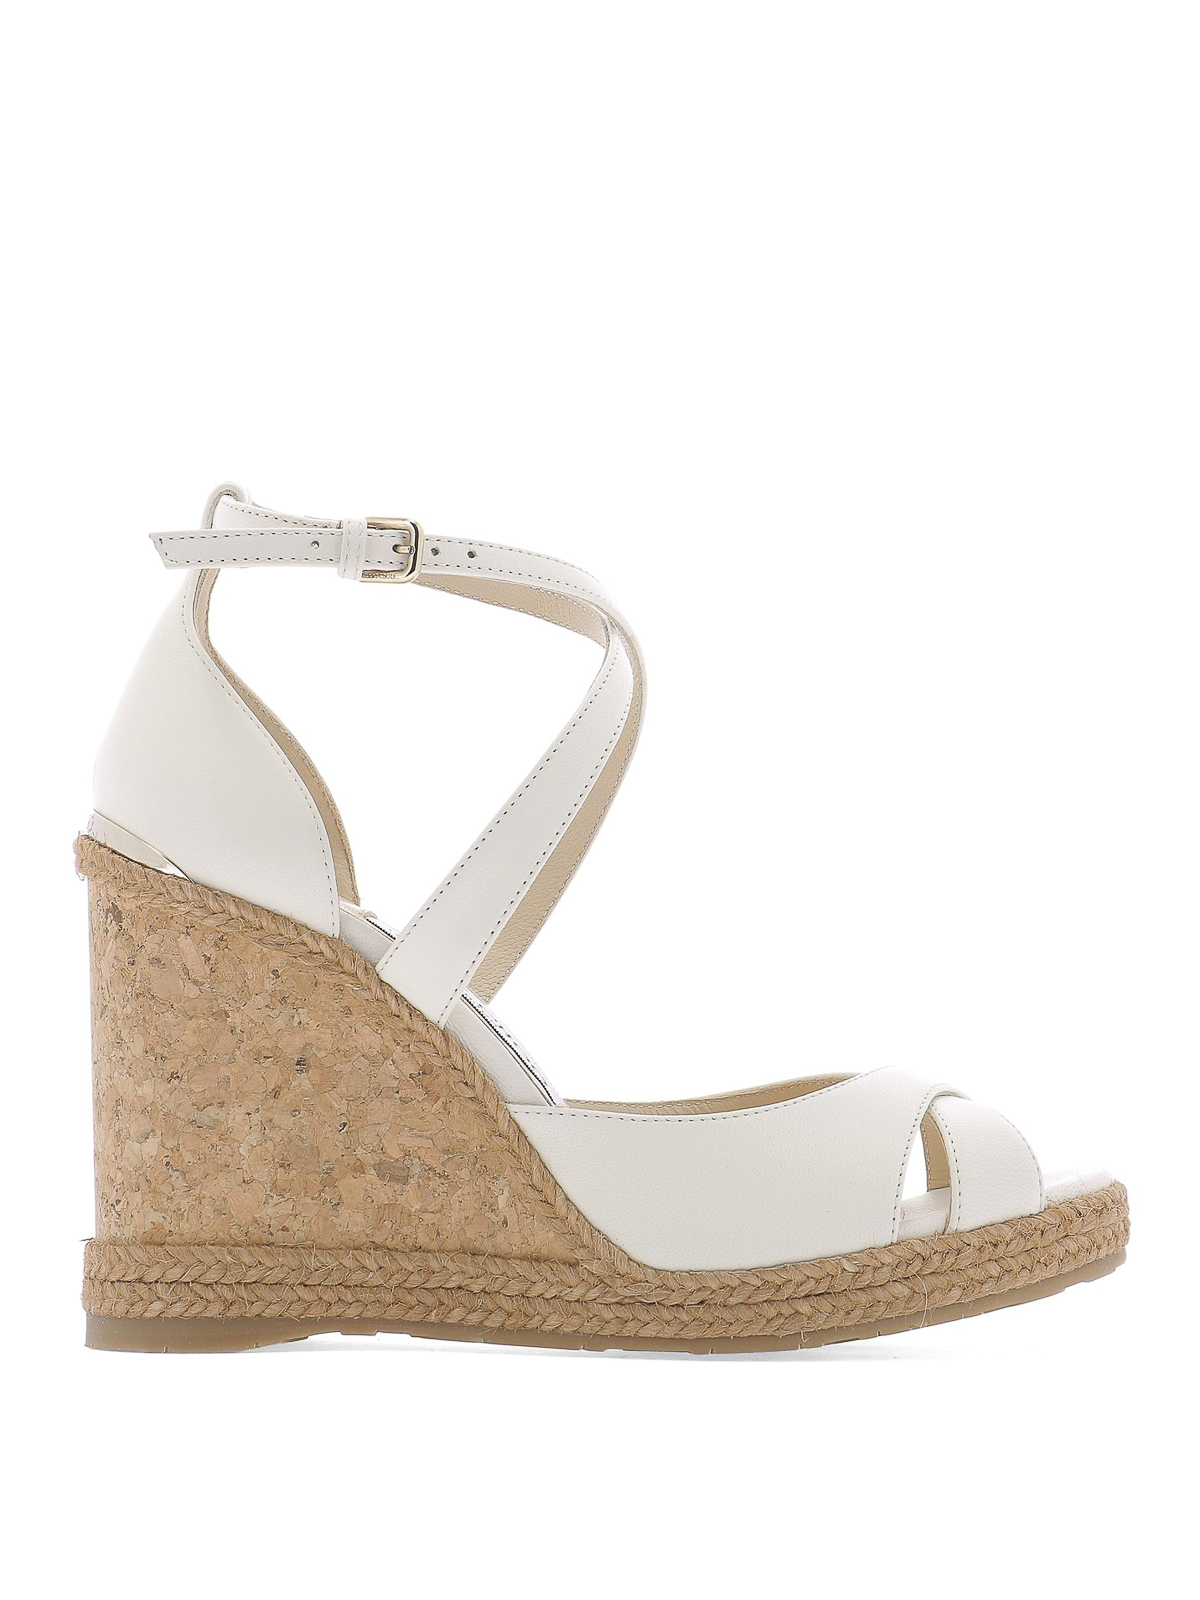 Sandals Jimmy Choo - Alanah 105 white leather wedge sandals ...